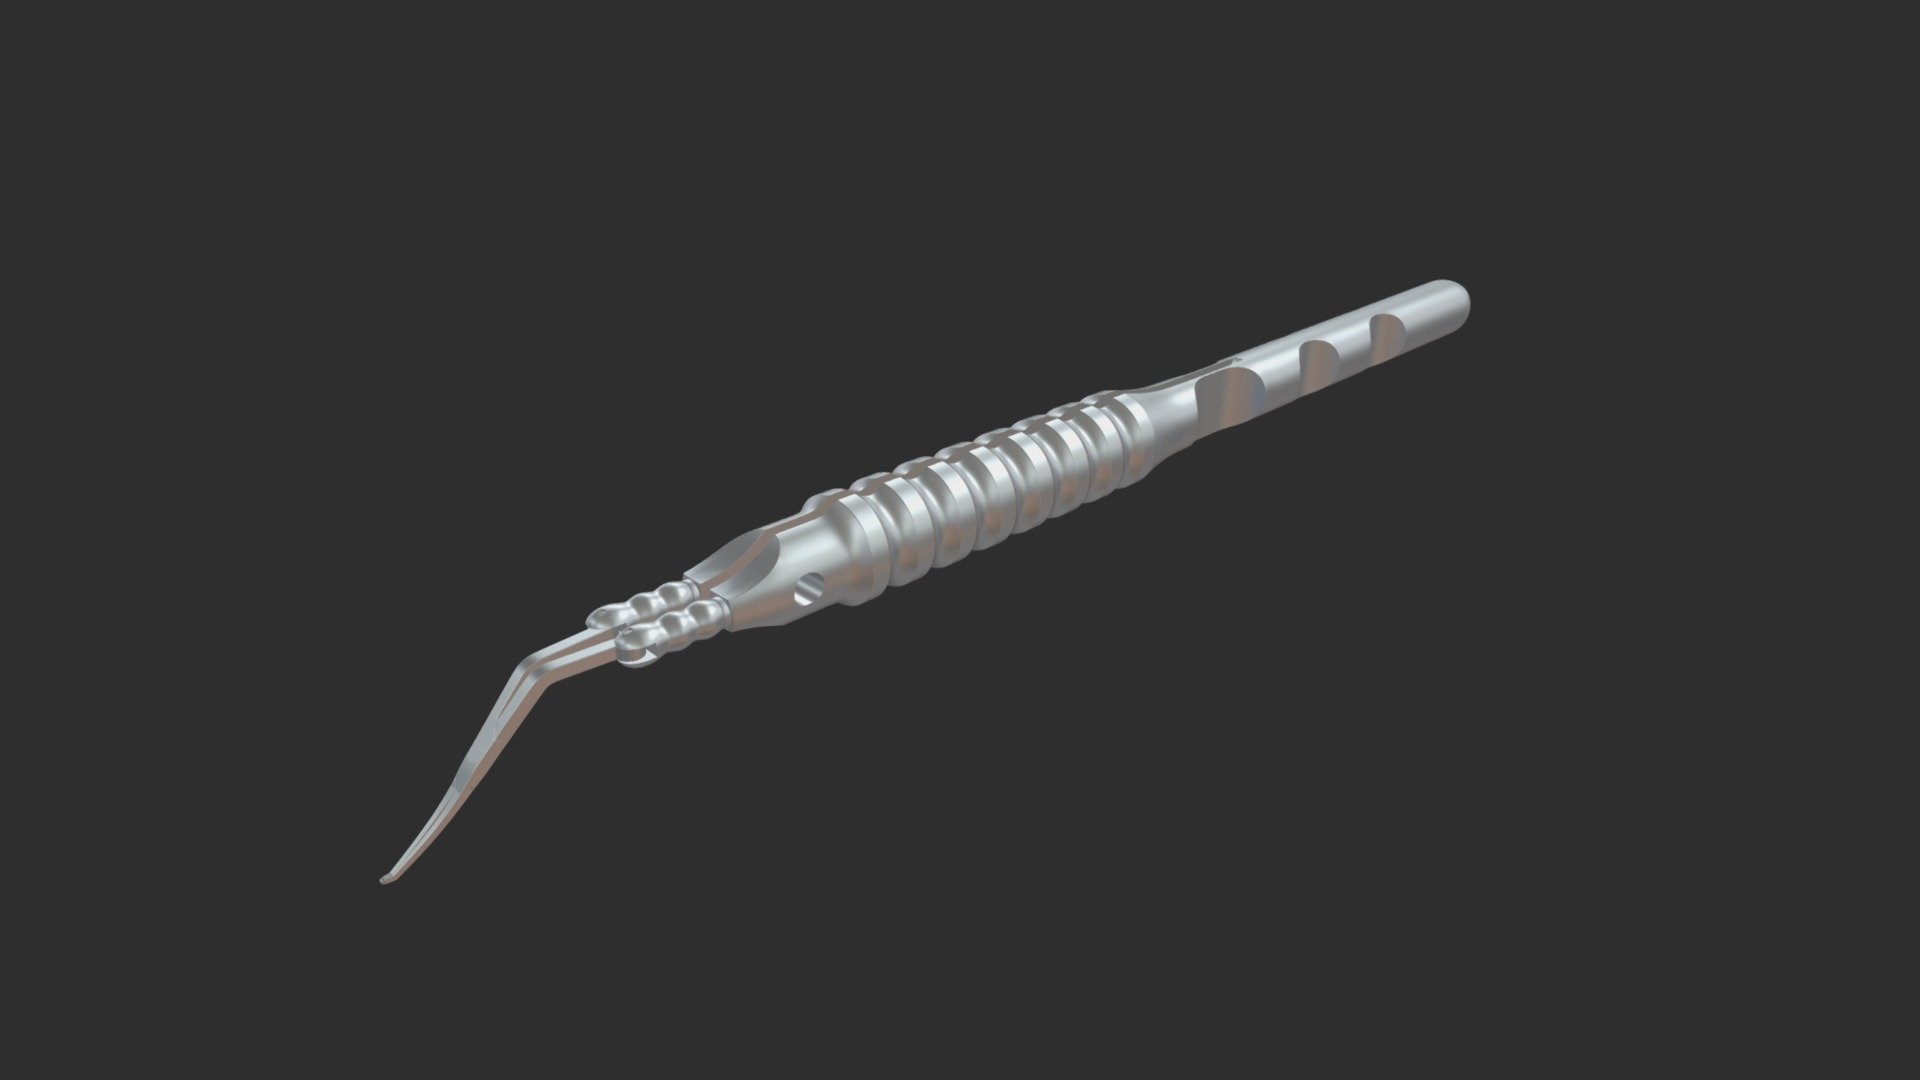 Very small eye surgery pincers, completely by hand reverse engineered to create a printable 3D object. Not sure if this will be able to be printed due to the extremely fine details.
The whole thing is merely 120mm long and has a diameter of 6mm. Very small 3d model